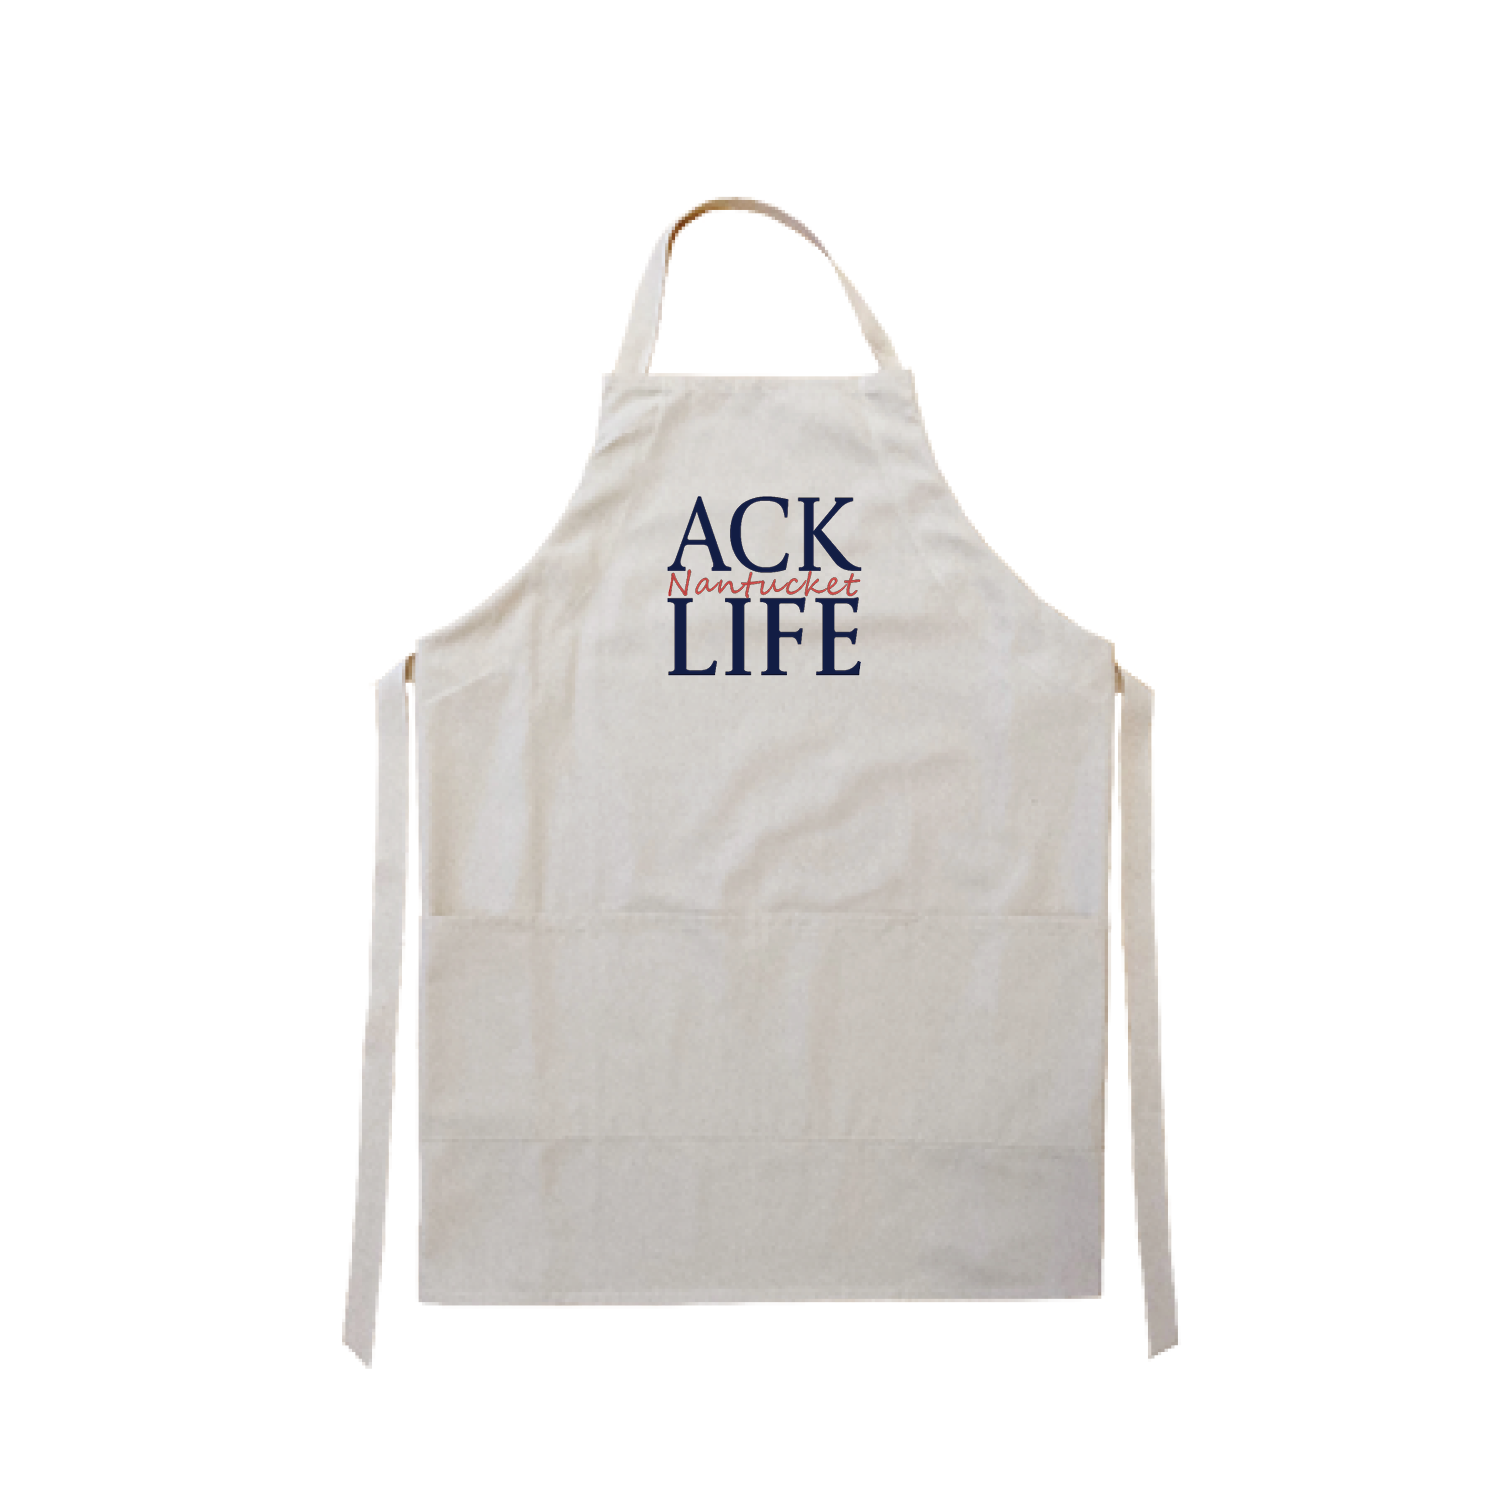 ACK Life Nantucket in nantucket red apron